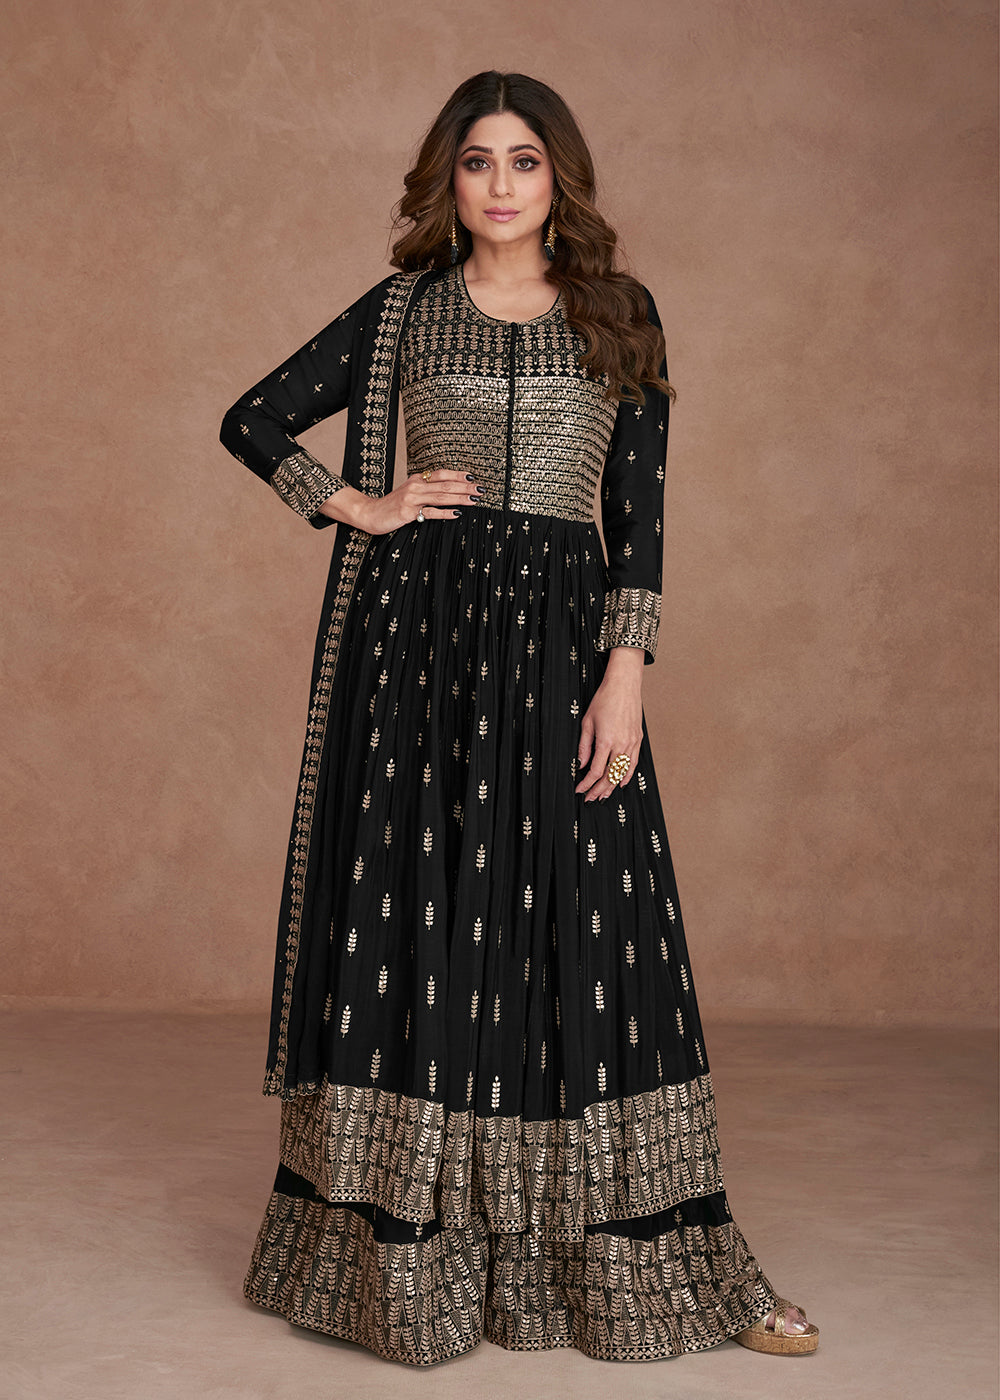 Buy Now Festive Look Glamorous Black Zari Embroidered Palazzo Suit Online in USA, UK, Canada, Germany, Australia & Worldwide at Empress Clothing. 